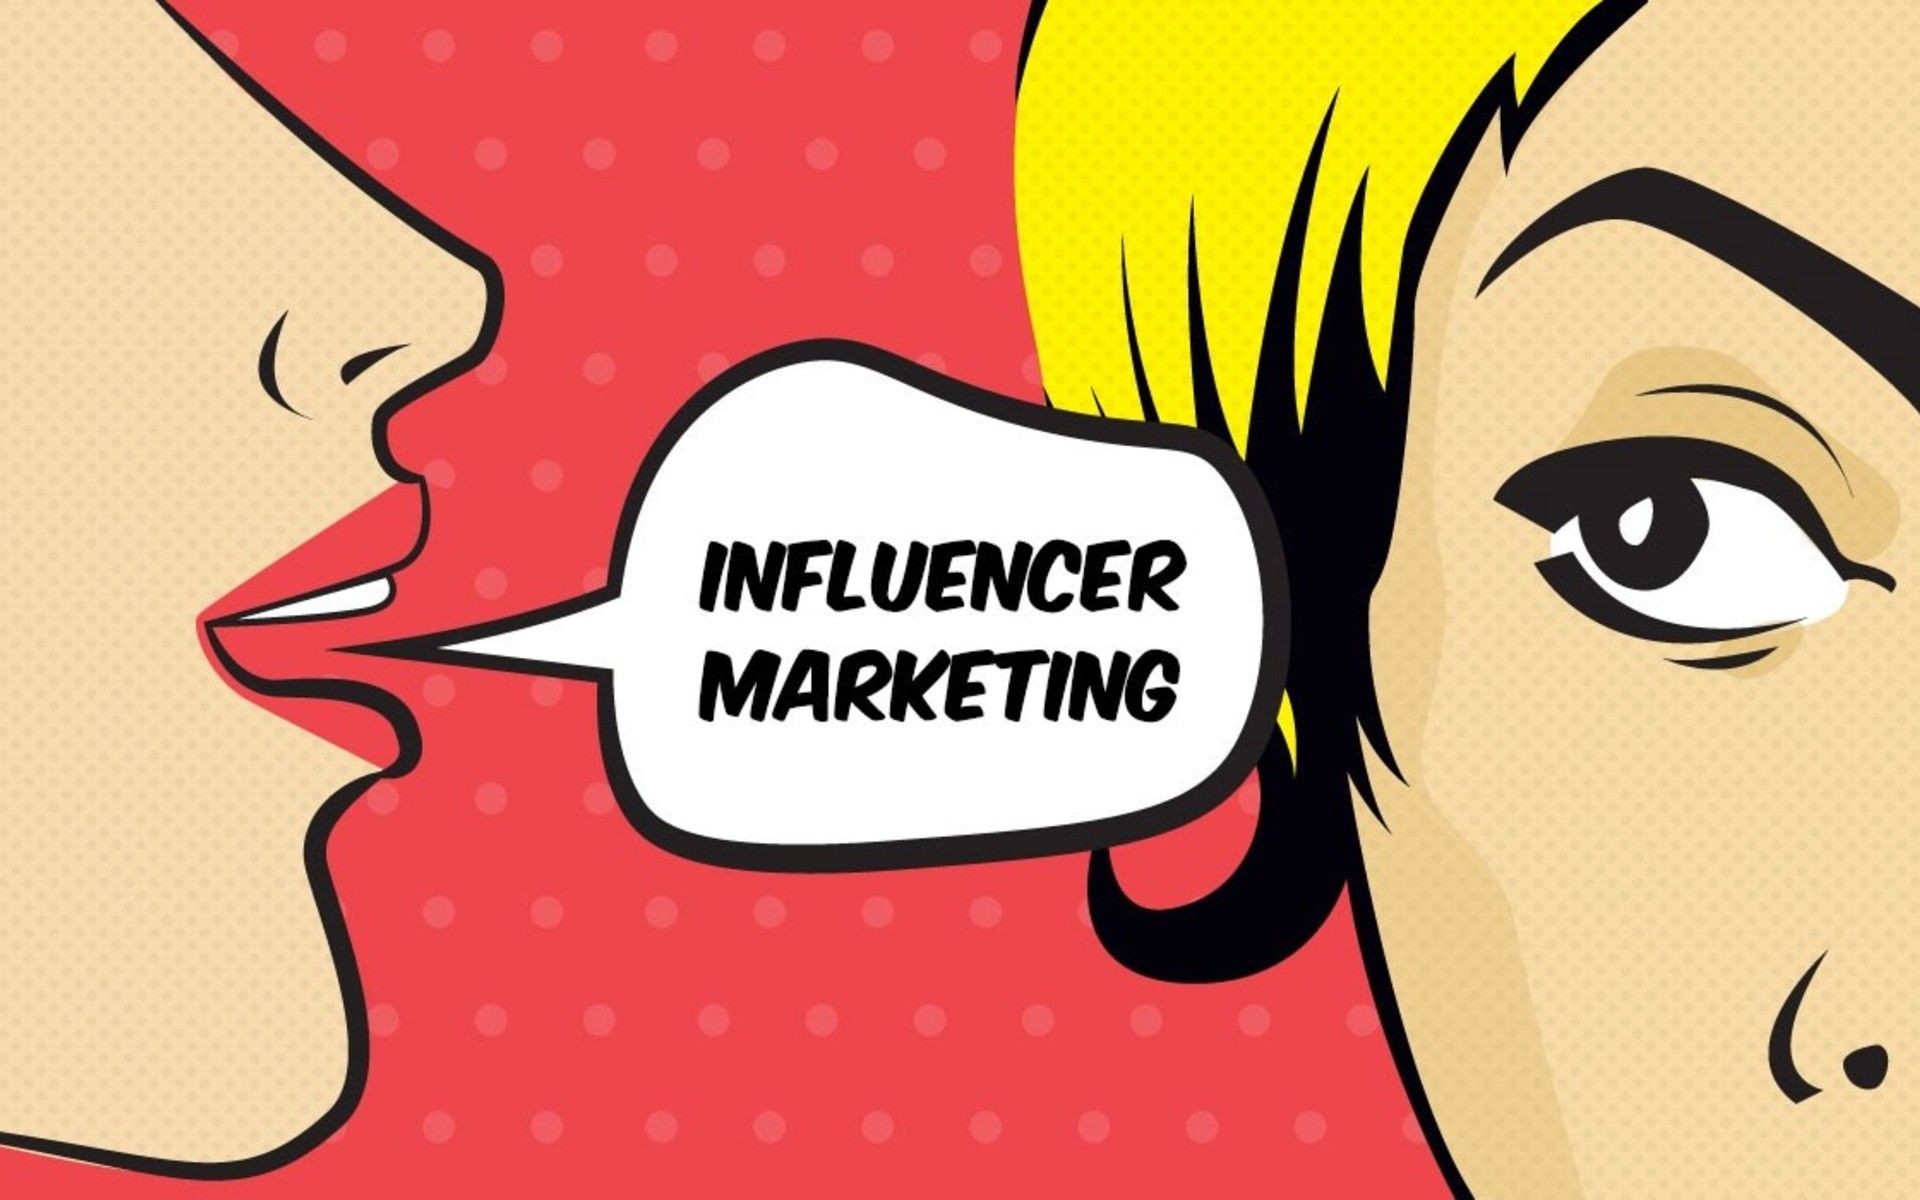 Is influencer marketing the future?